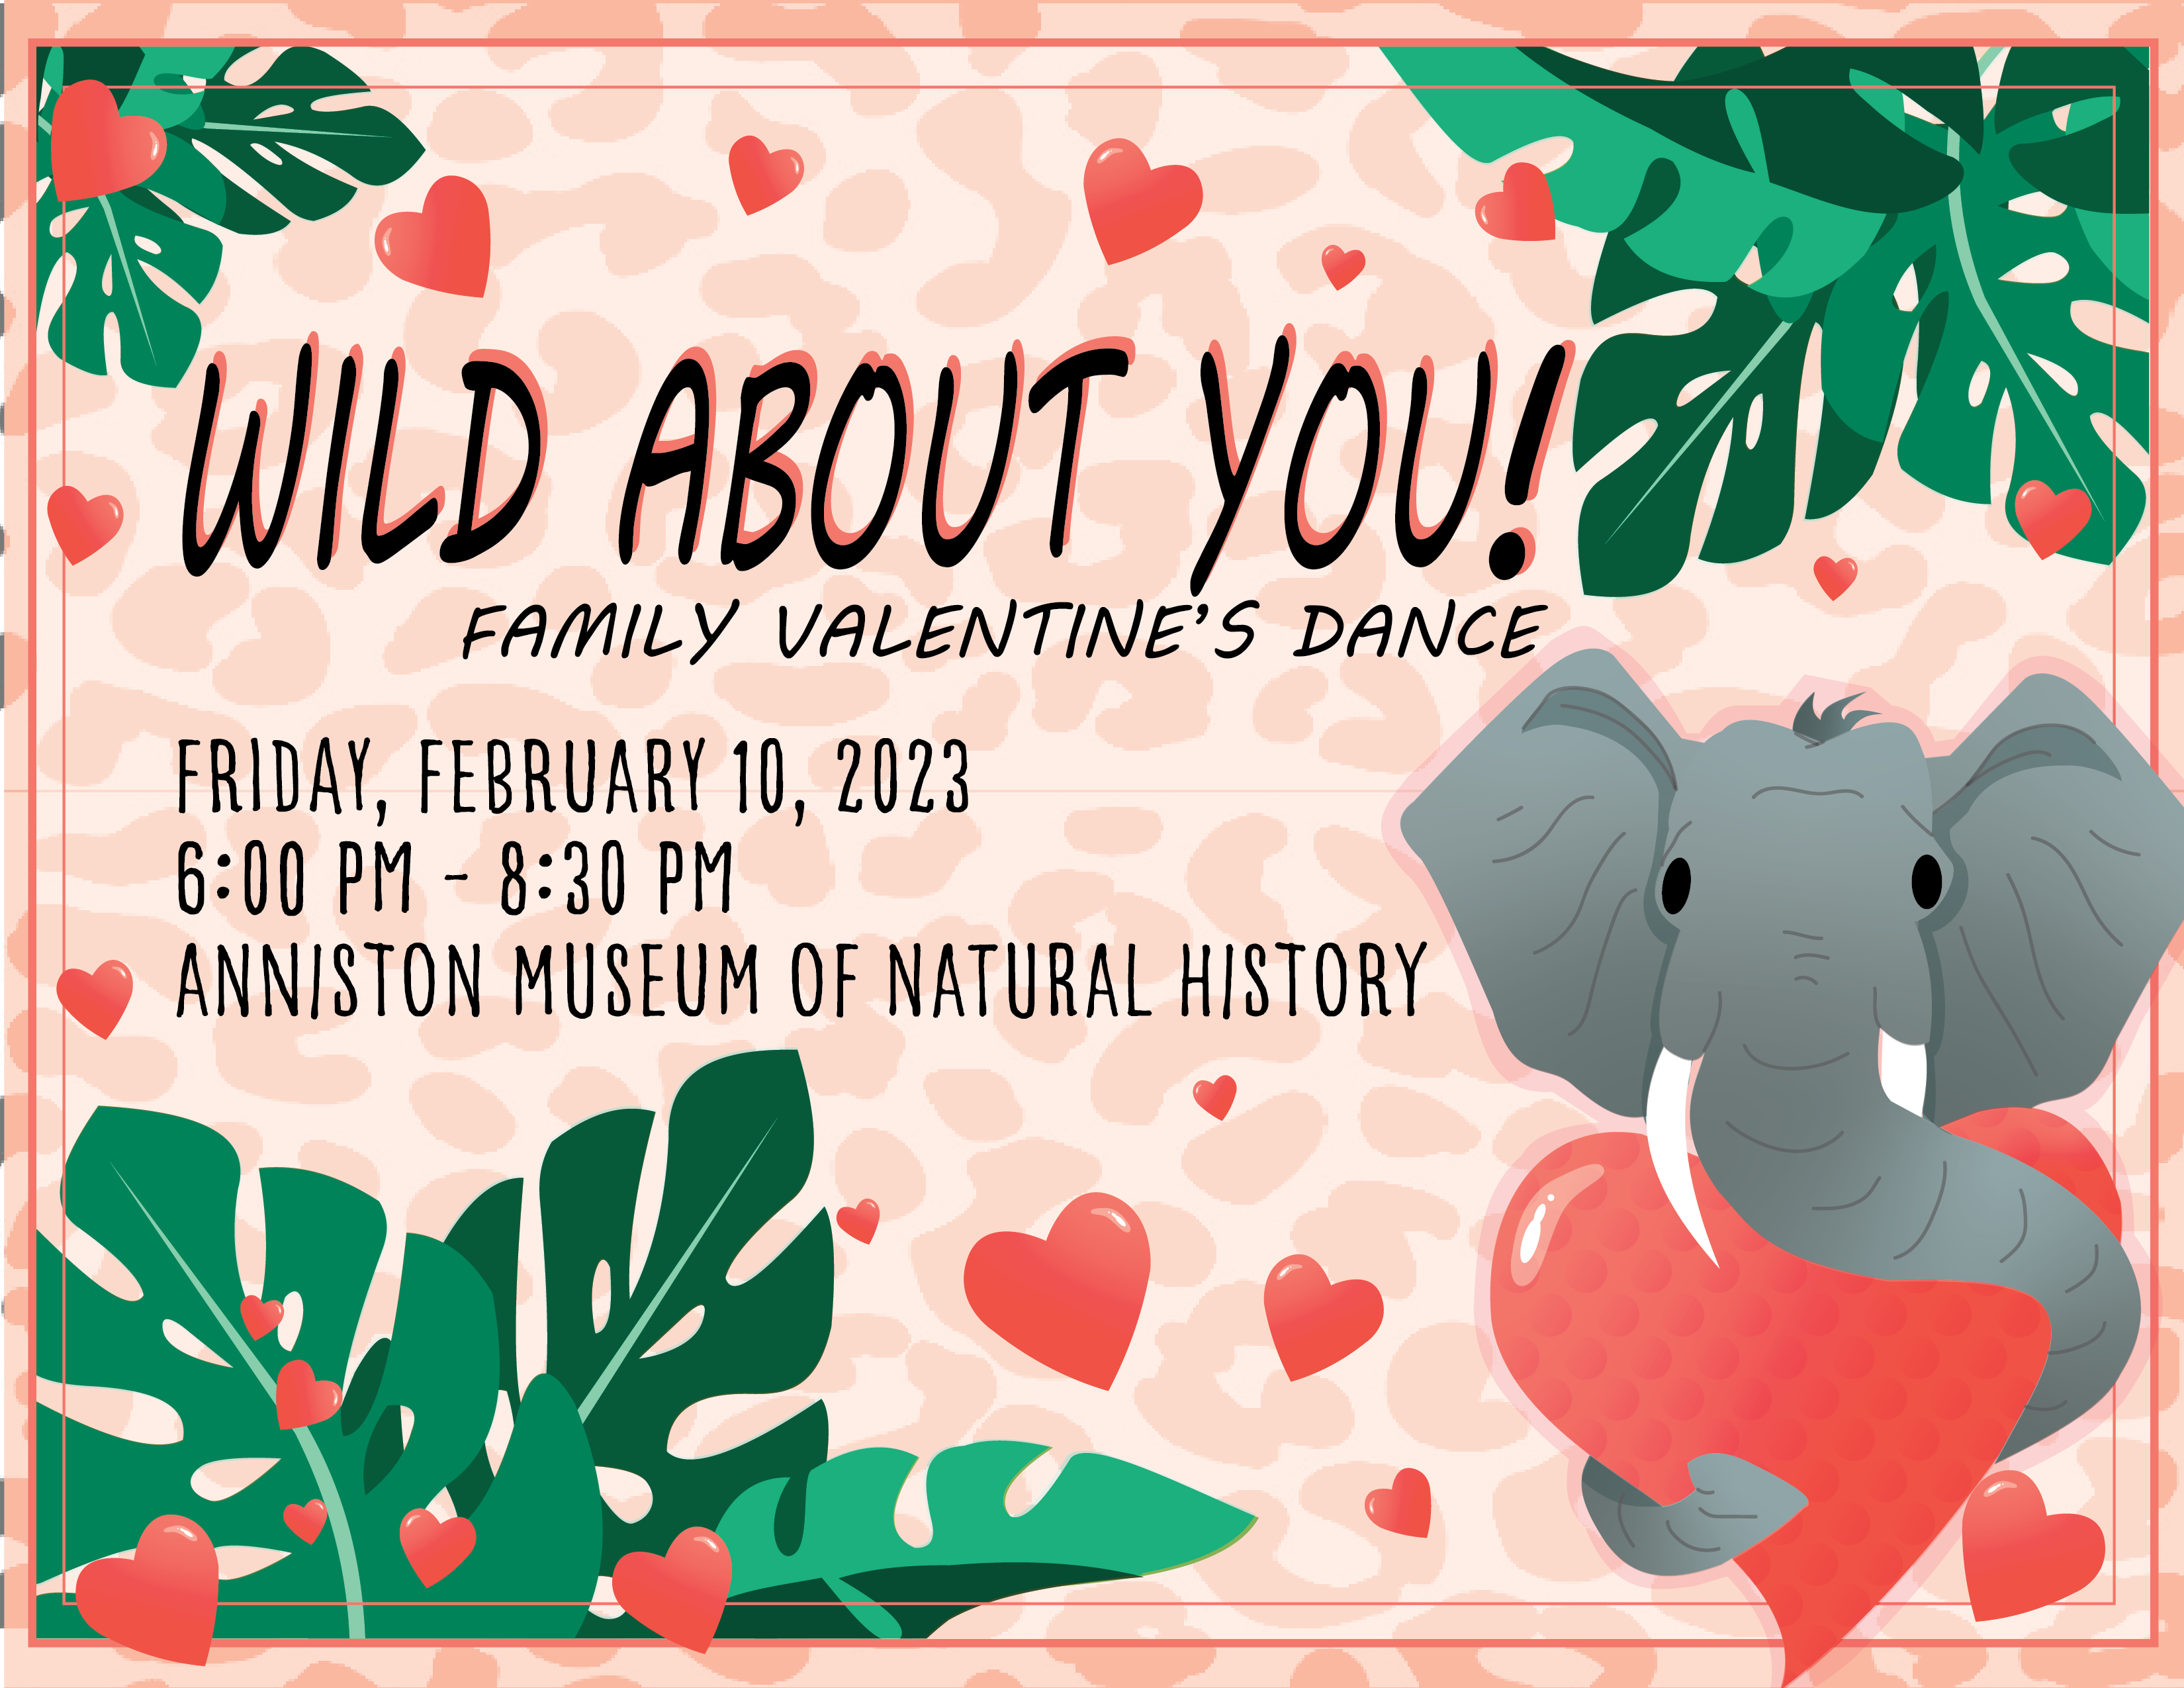 Wild About You! Family Valentine’s Dance